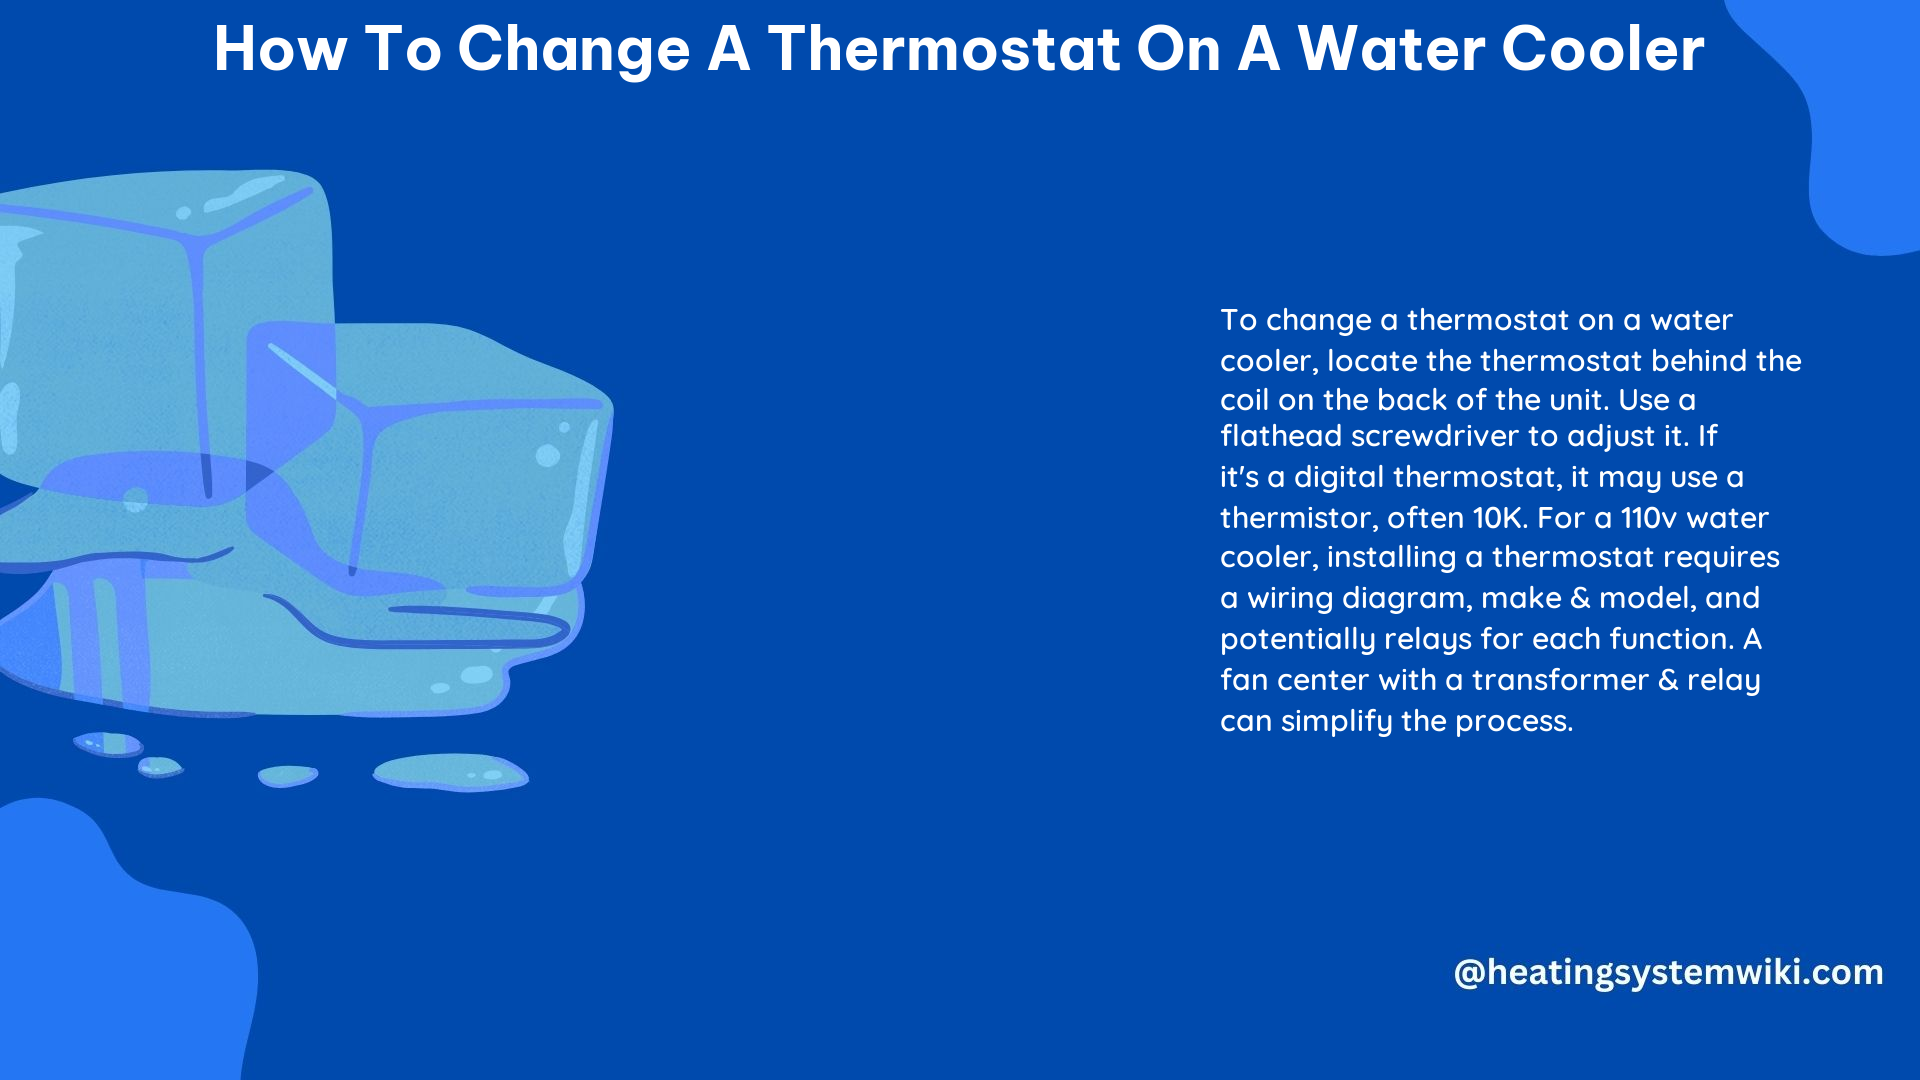 How to Change a Thermostat on a Water Cooler